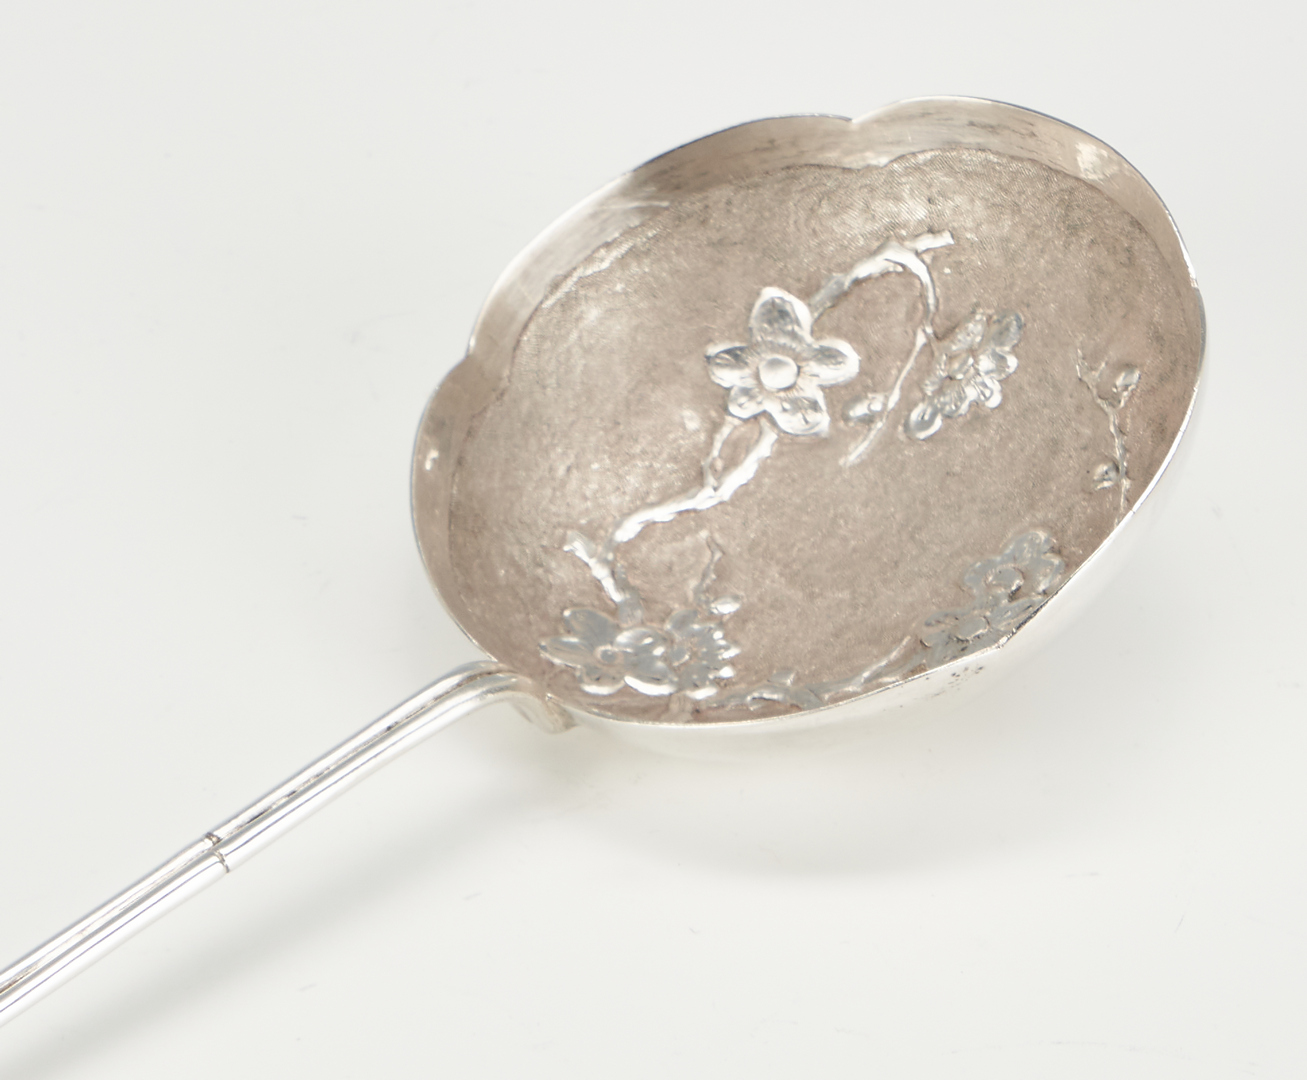 Lot 2: Asian Silver Trophy, Ladle and Bowl